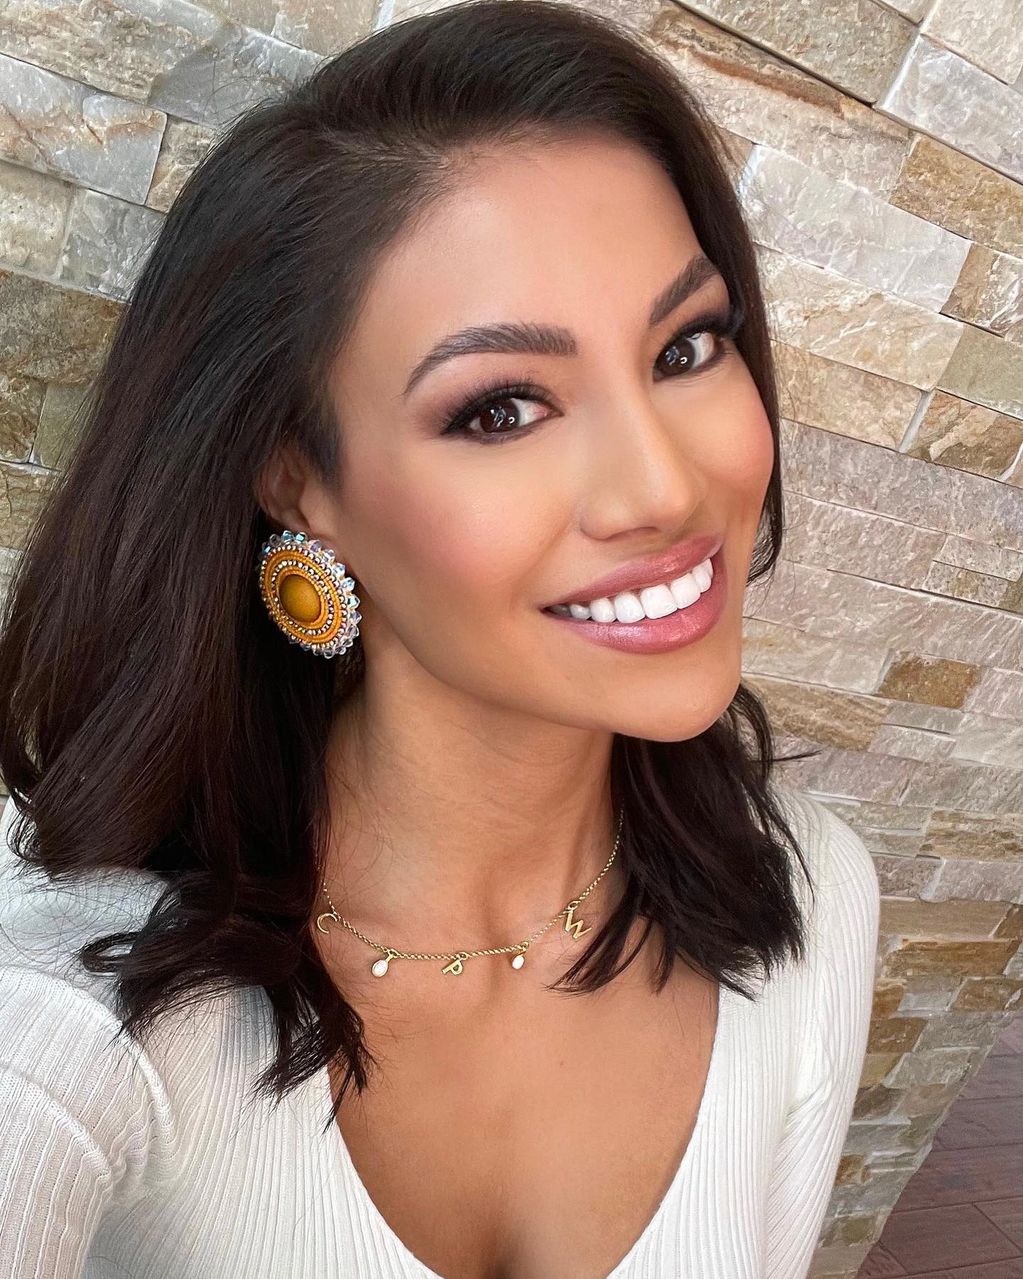 Ashley Callingbull, model, actress, and television personality. First Canadian and Indigenous woman 